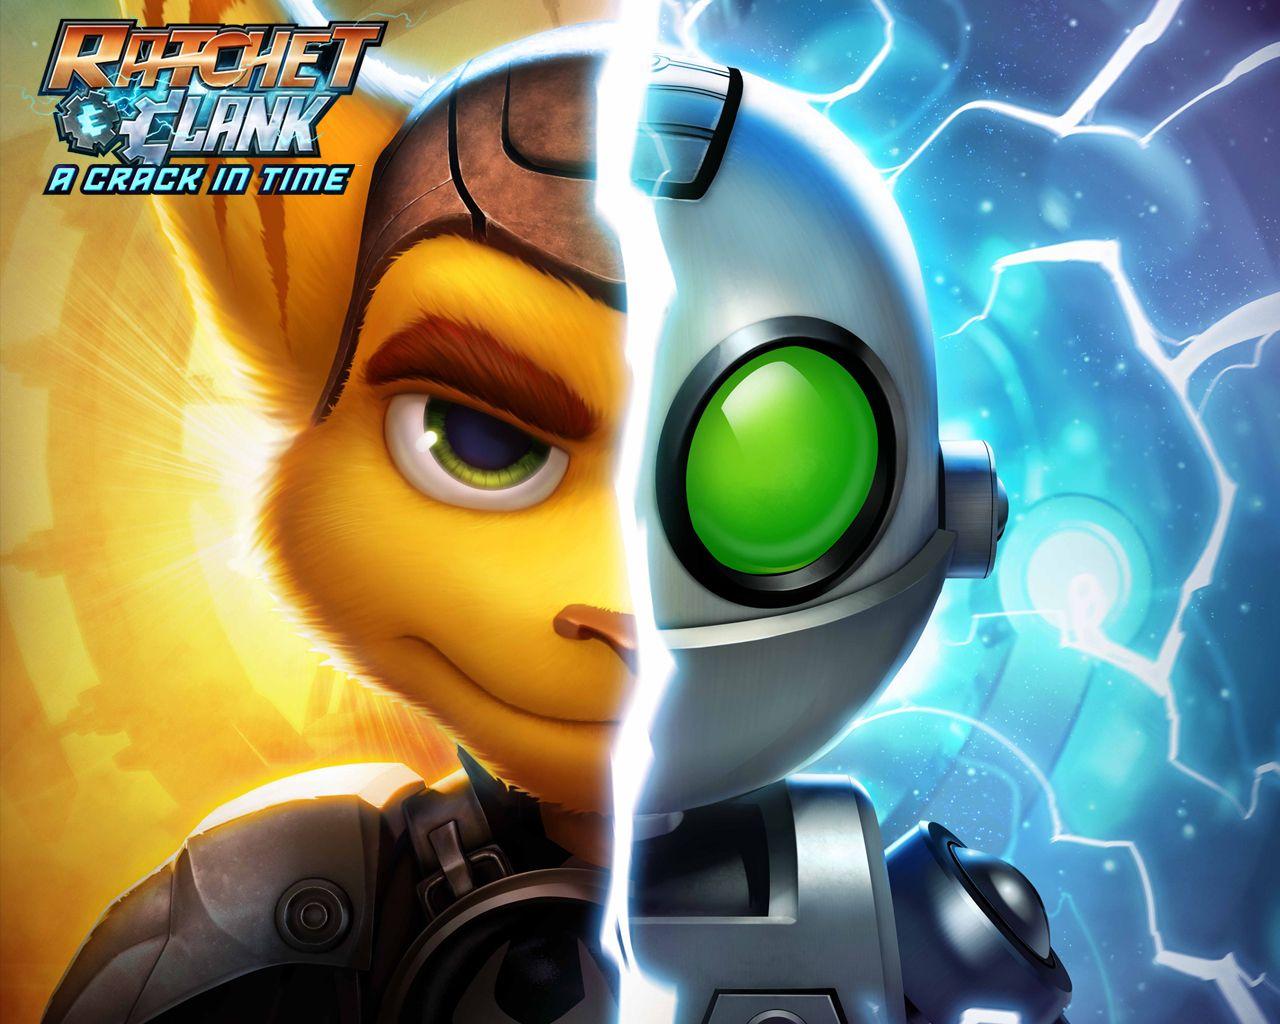 Wallpaper & Clank Future: A Crack In Time